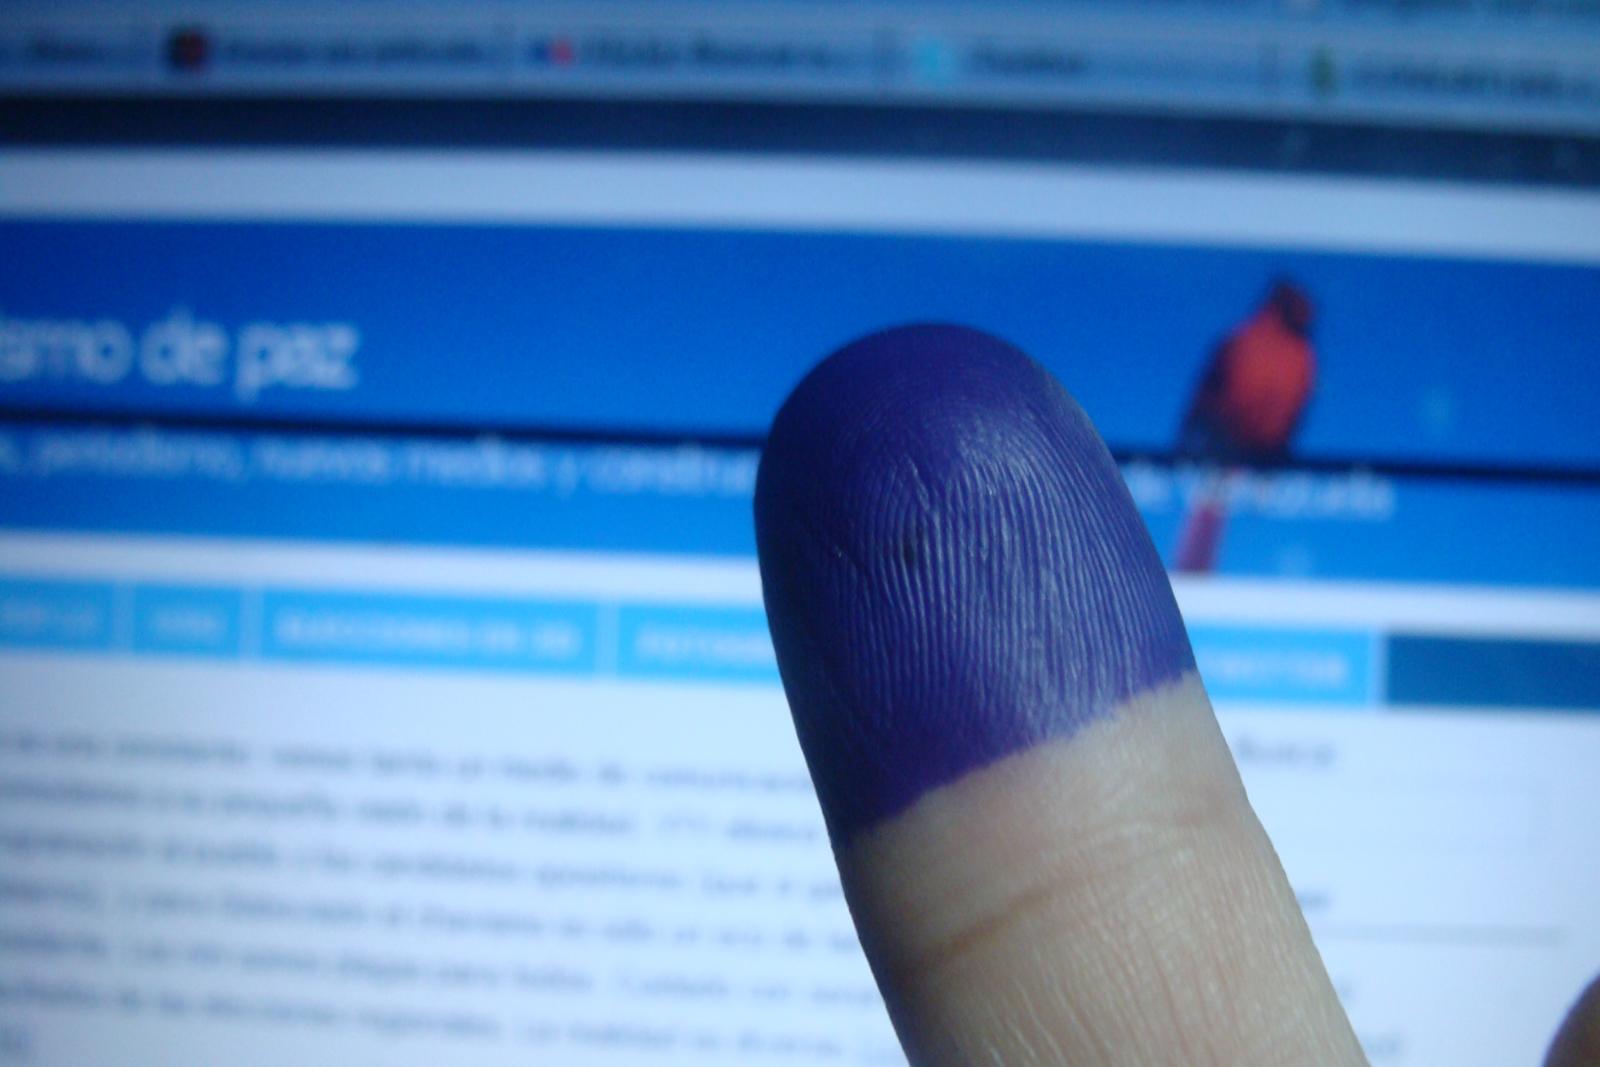 A voter holds up a dye-dipped finger, a symbol of voting in an election. Photo courtesy of Luis Carlos Díaz via Flickr.